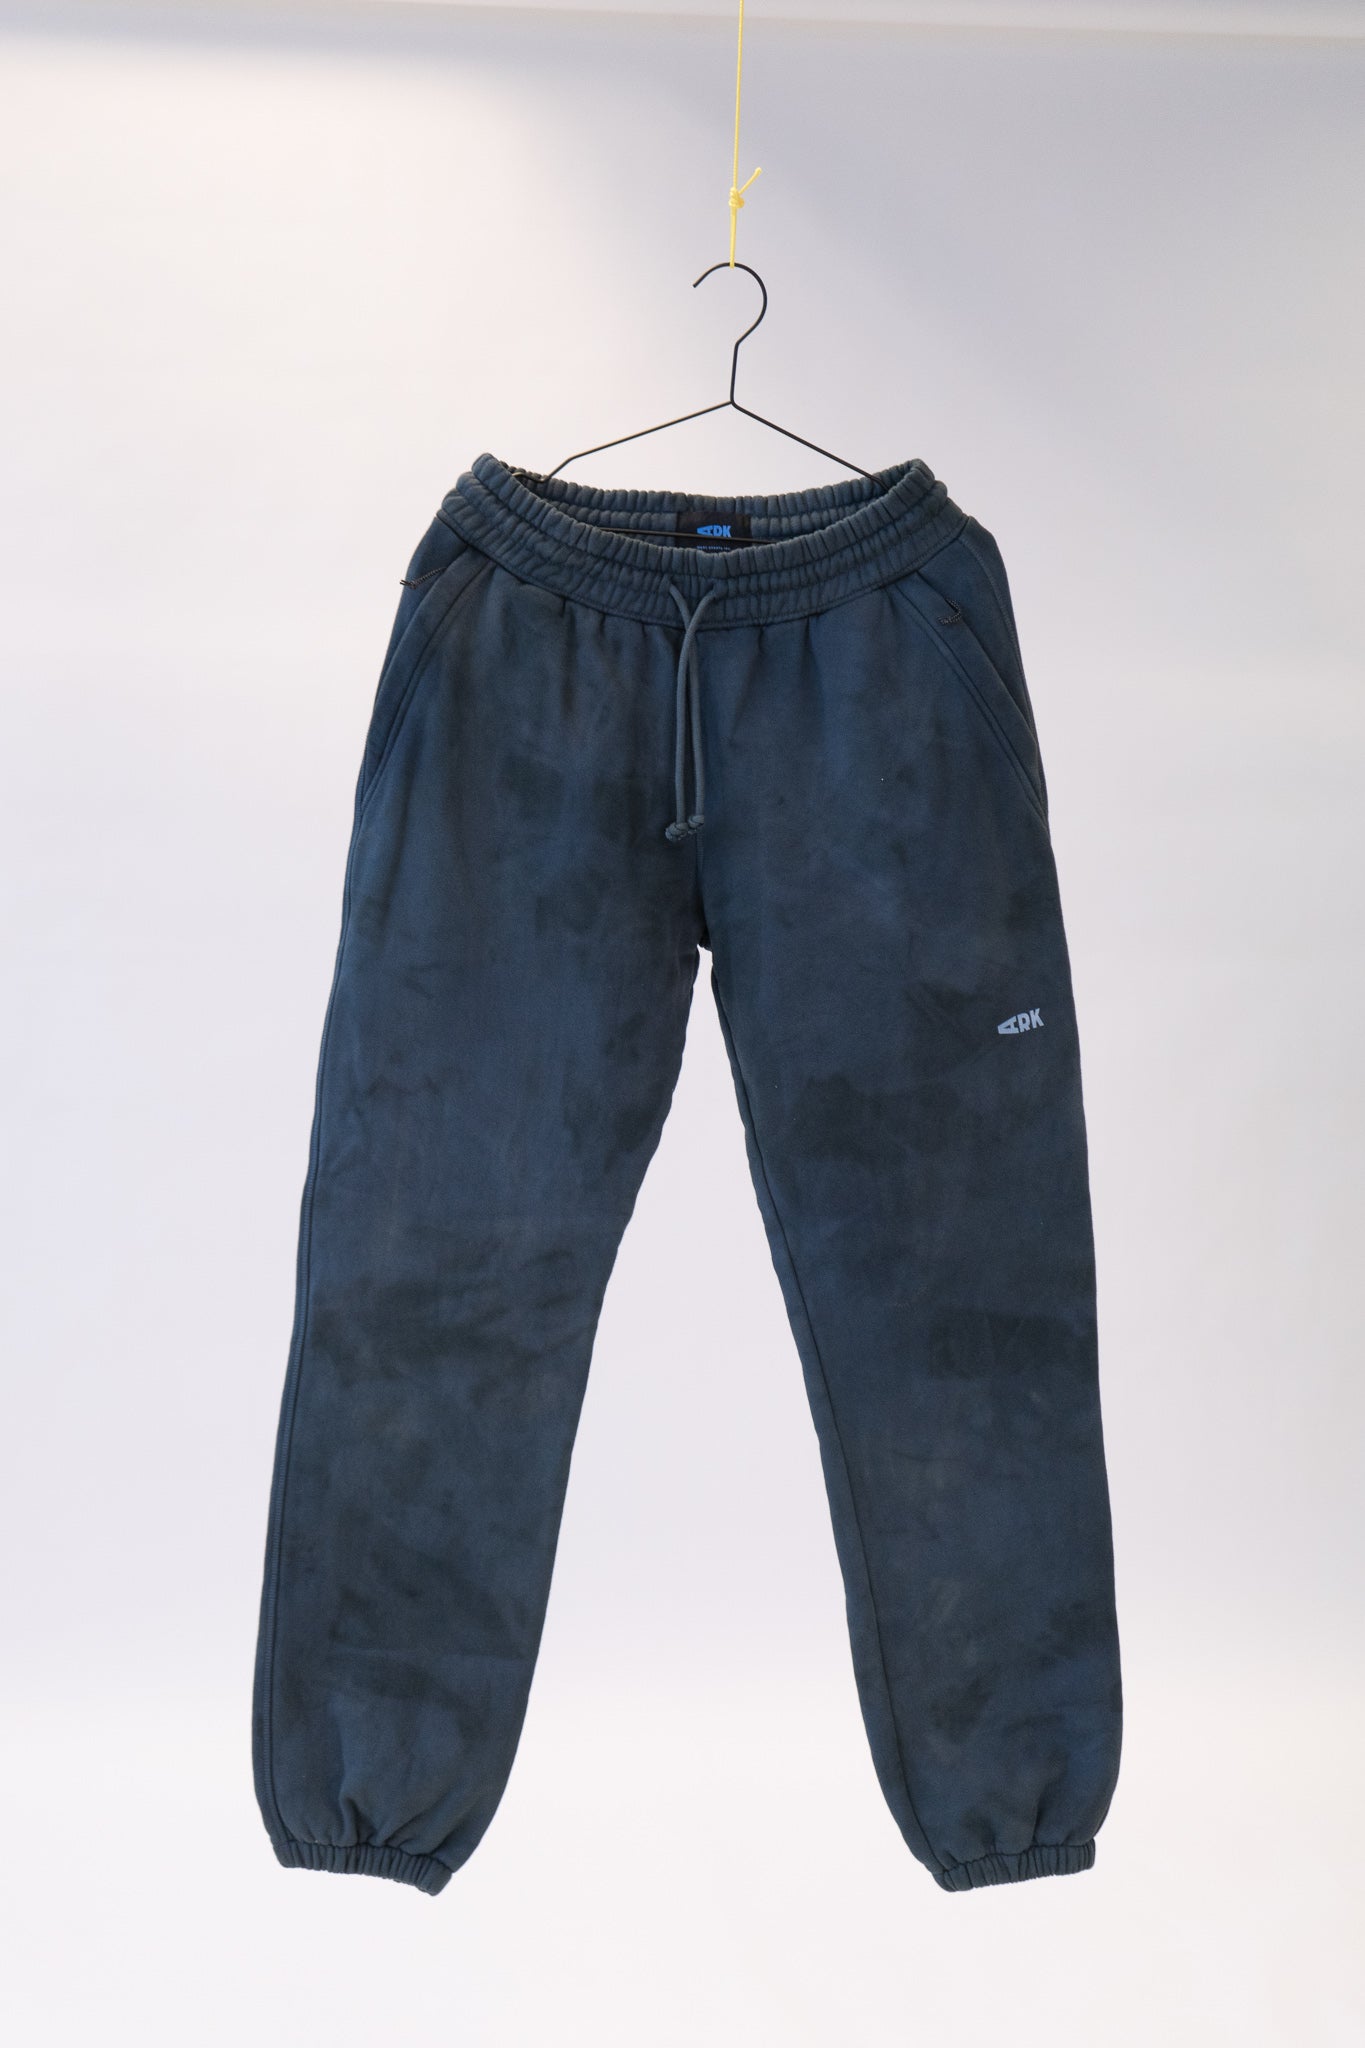 Product photo of Limited ARK TRIBE Premium Cotton Sweatpants Blue Tie Dye